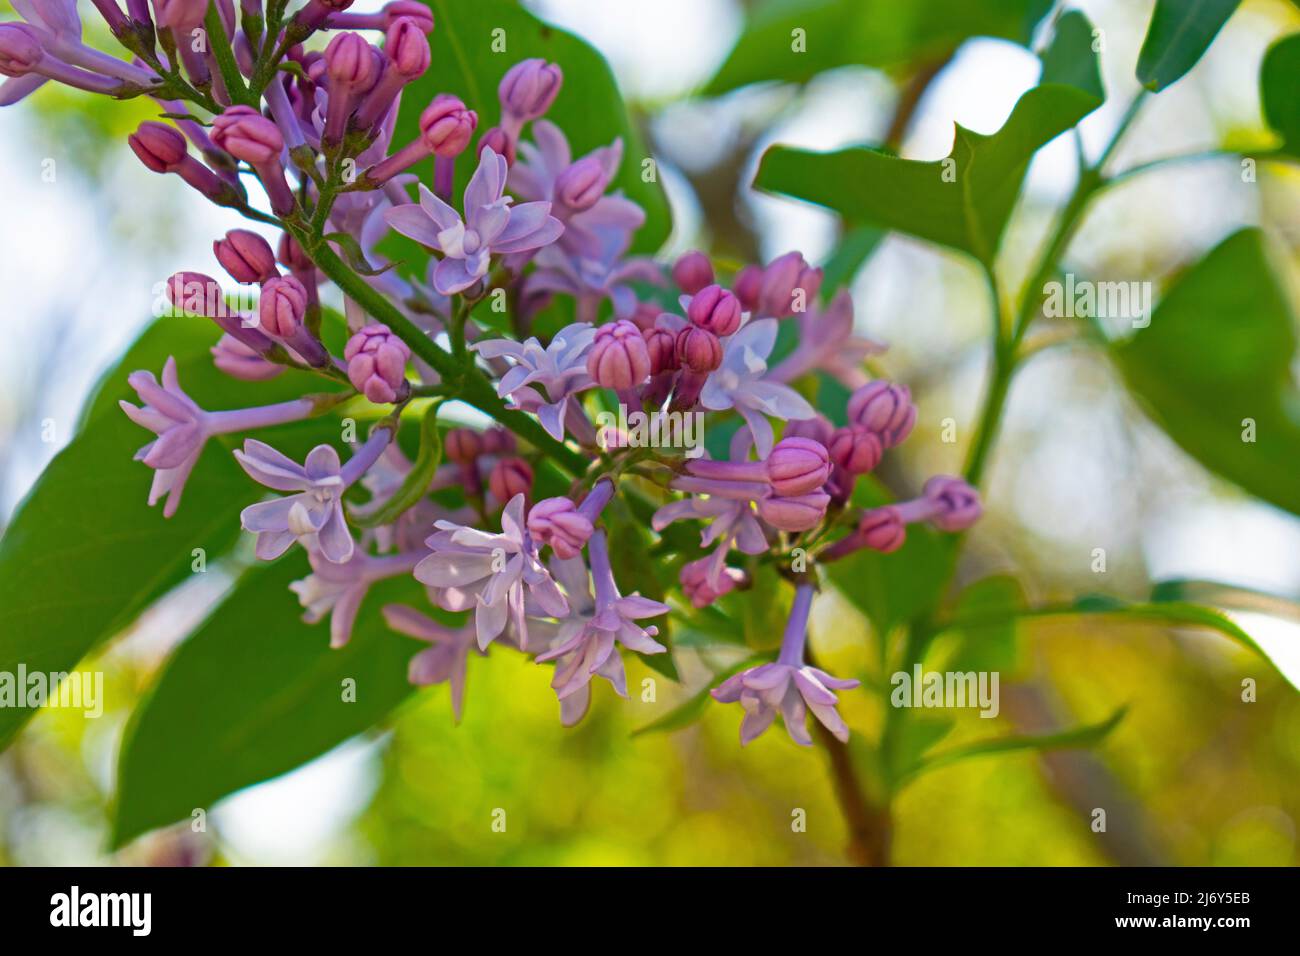 Fragrant light pink lilac flowers starting to bloom in early springtime on a background of blurred lilac leaves -01 Stock Photo